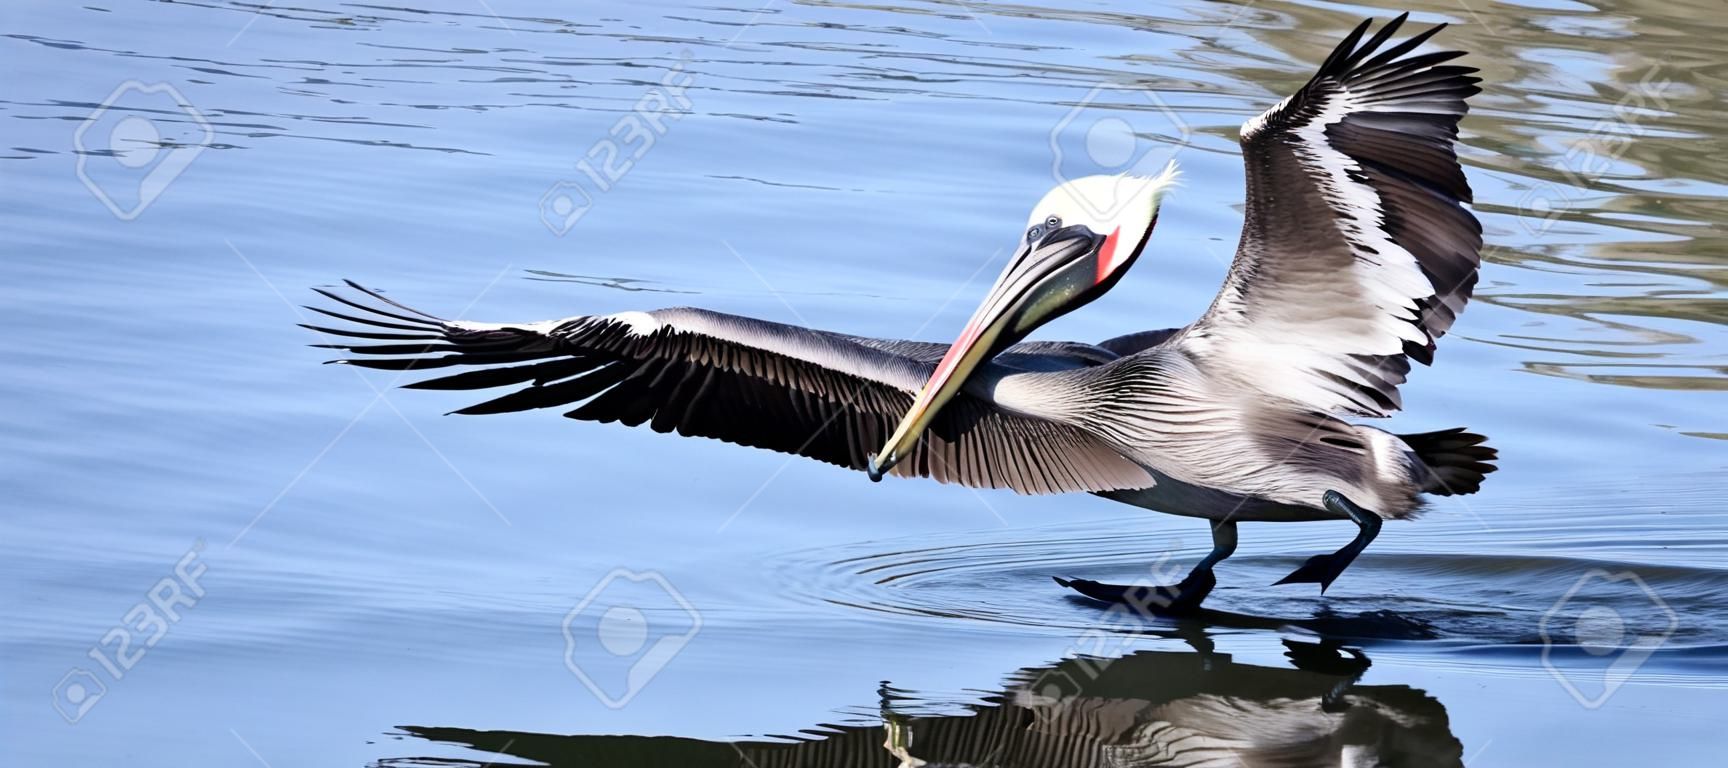 A Brown Pelican Catches a Fish with its Long Bill at the Surface of the Water